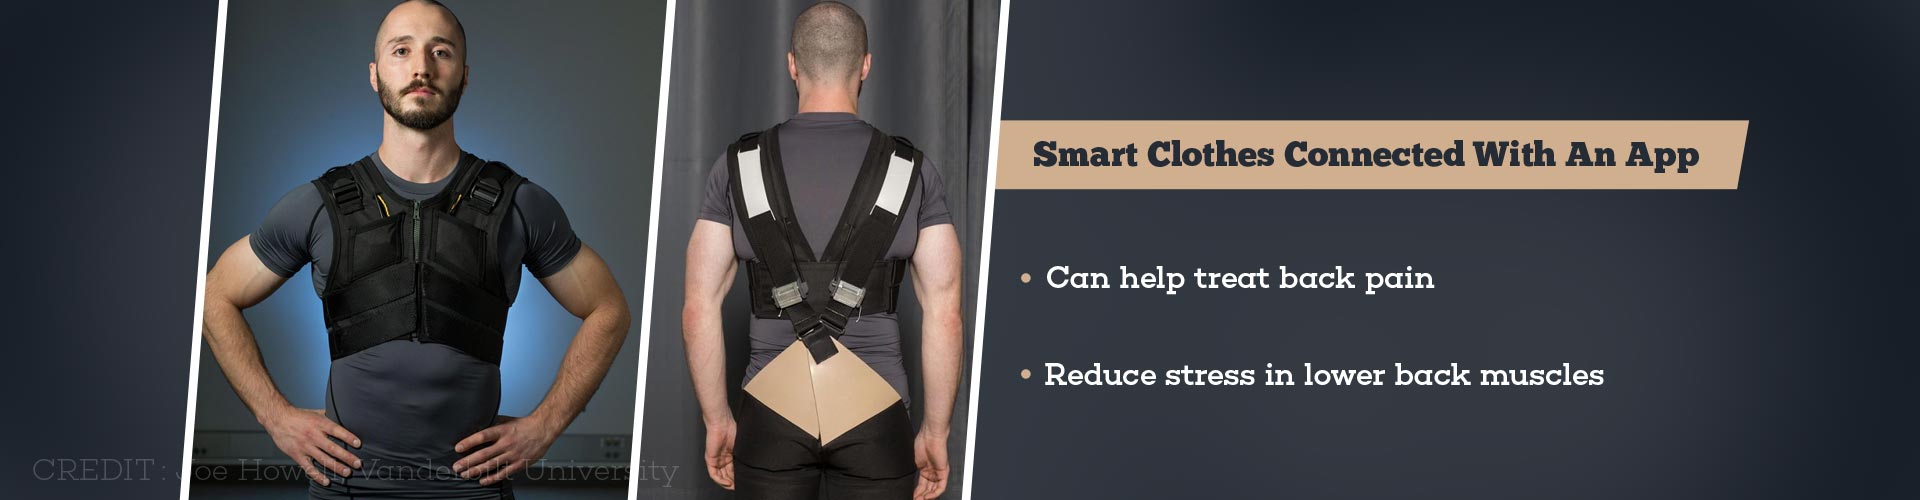 Smart clothes connected with an app
- Can help treat back pain
- Reduce stress in lower back muscles
